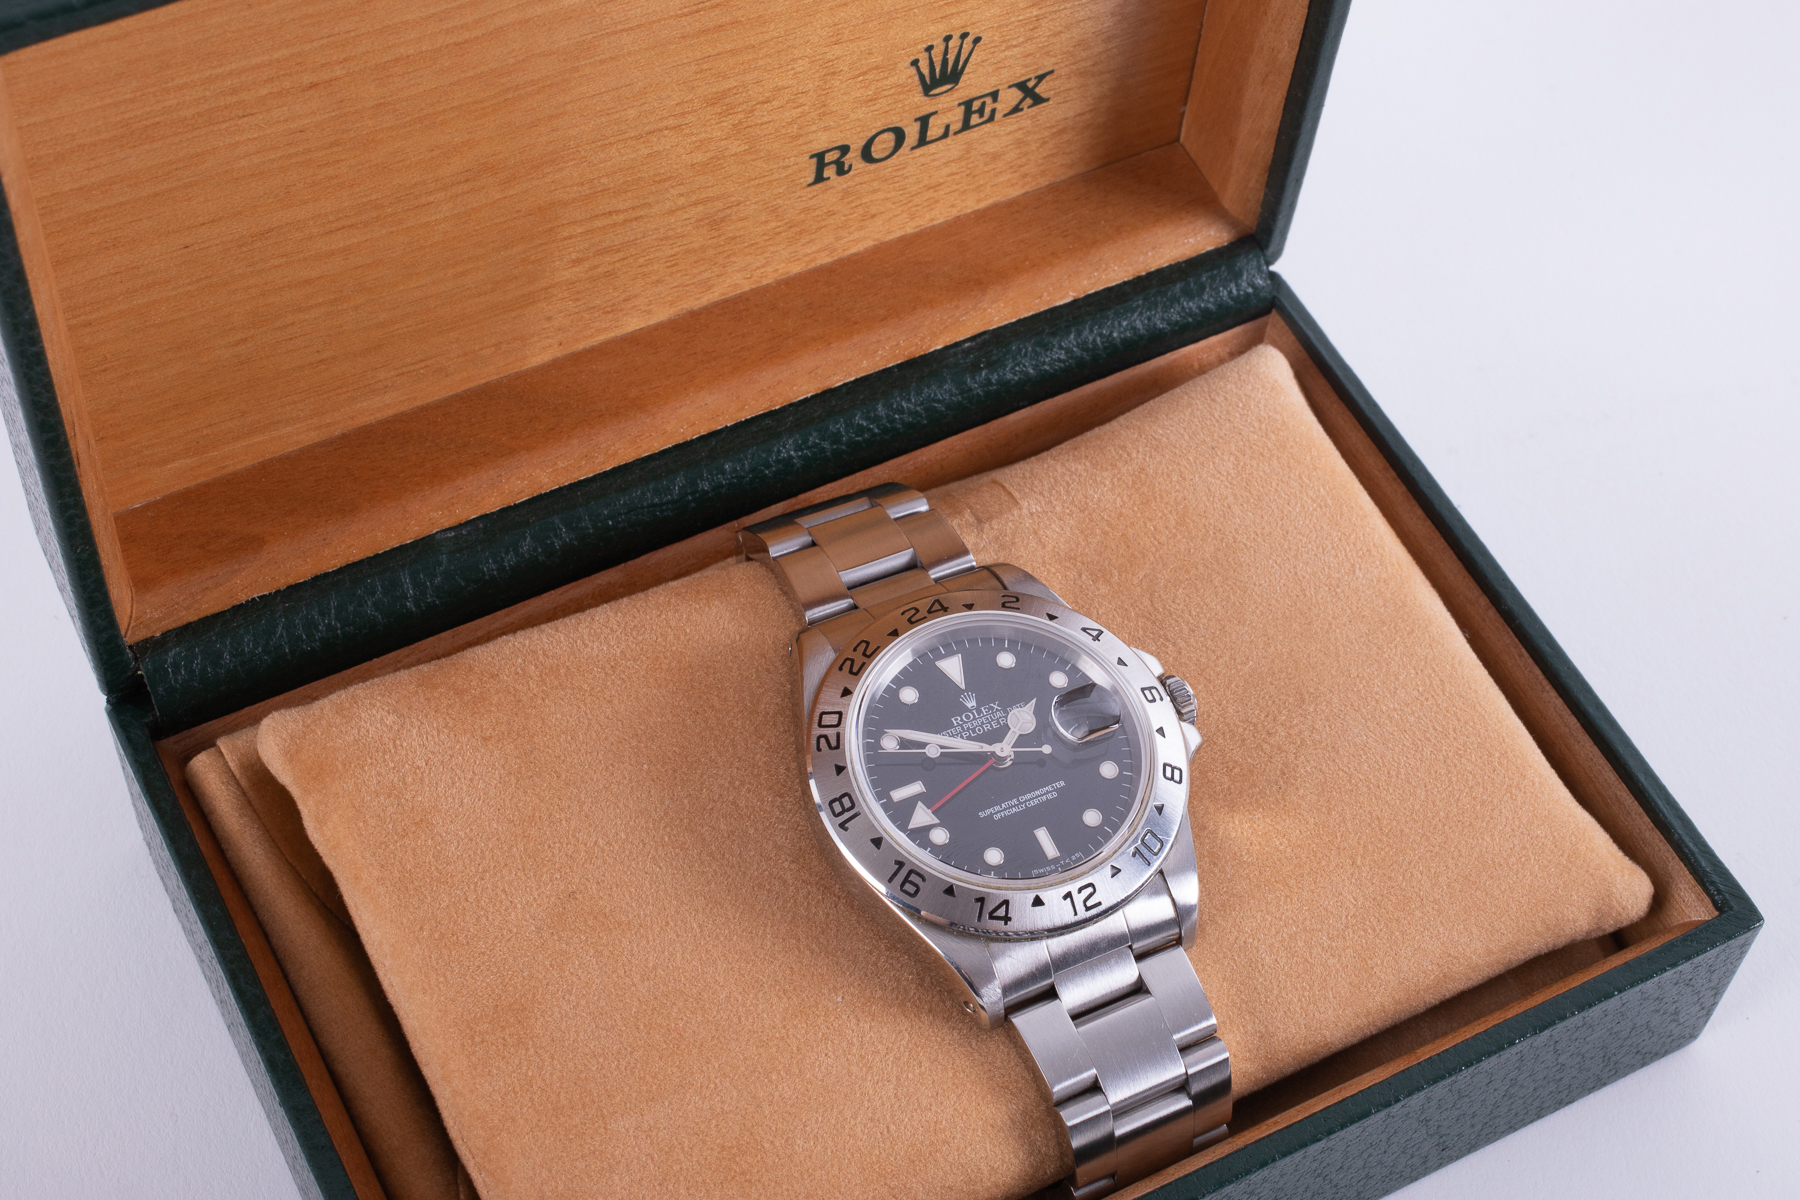 Rolex, a 1996 Rolex Explorer II, Oyster Perpetual Date, model 16570, guarantee number W940985, in - Image 5 of 9